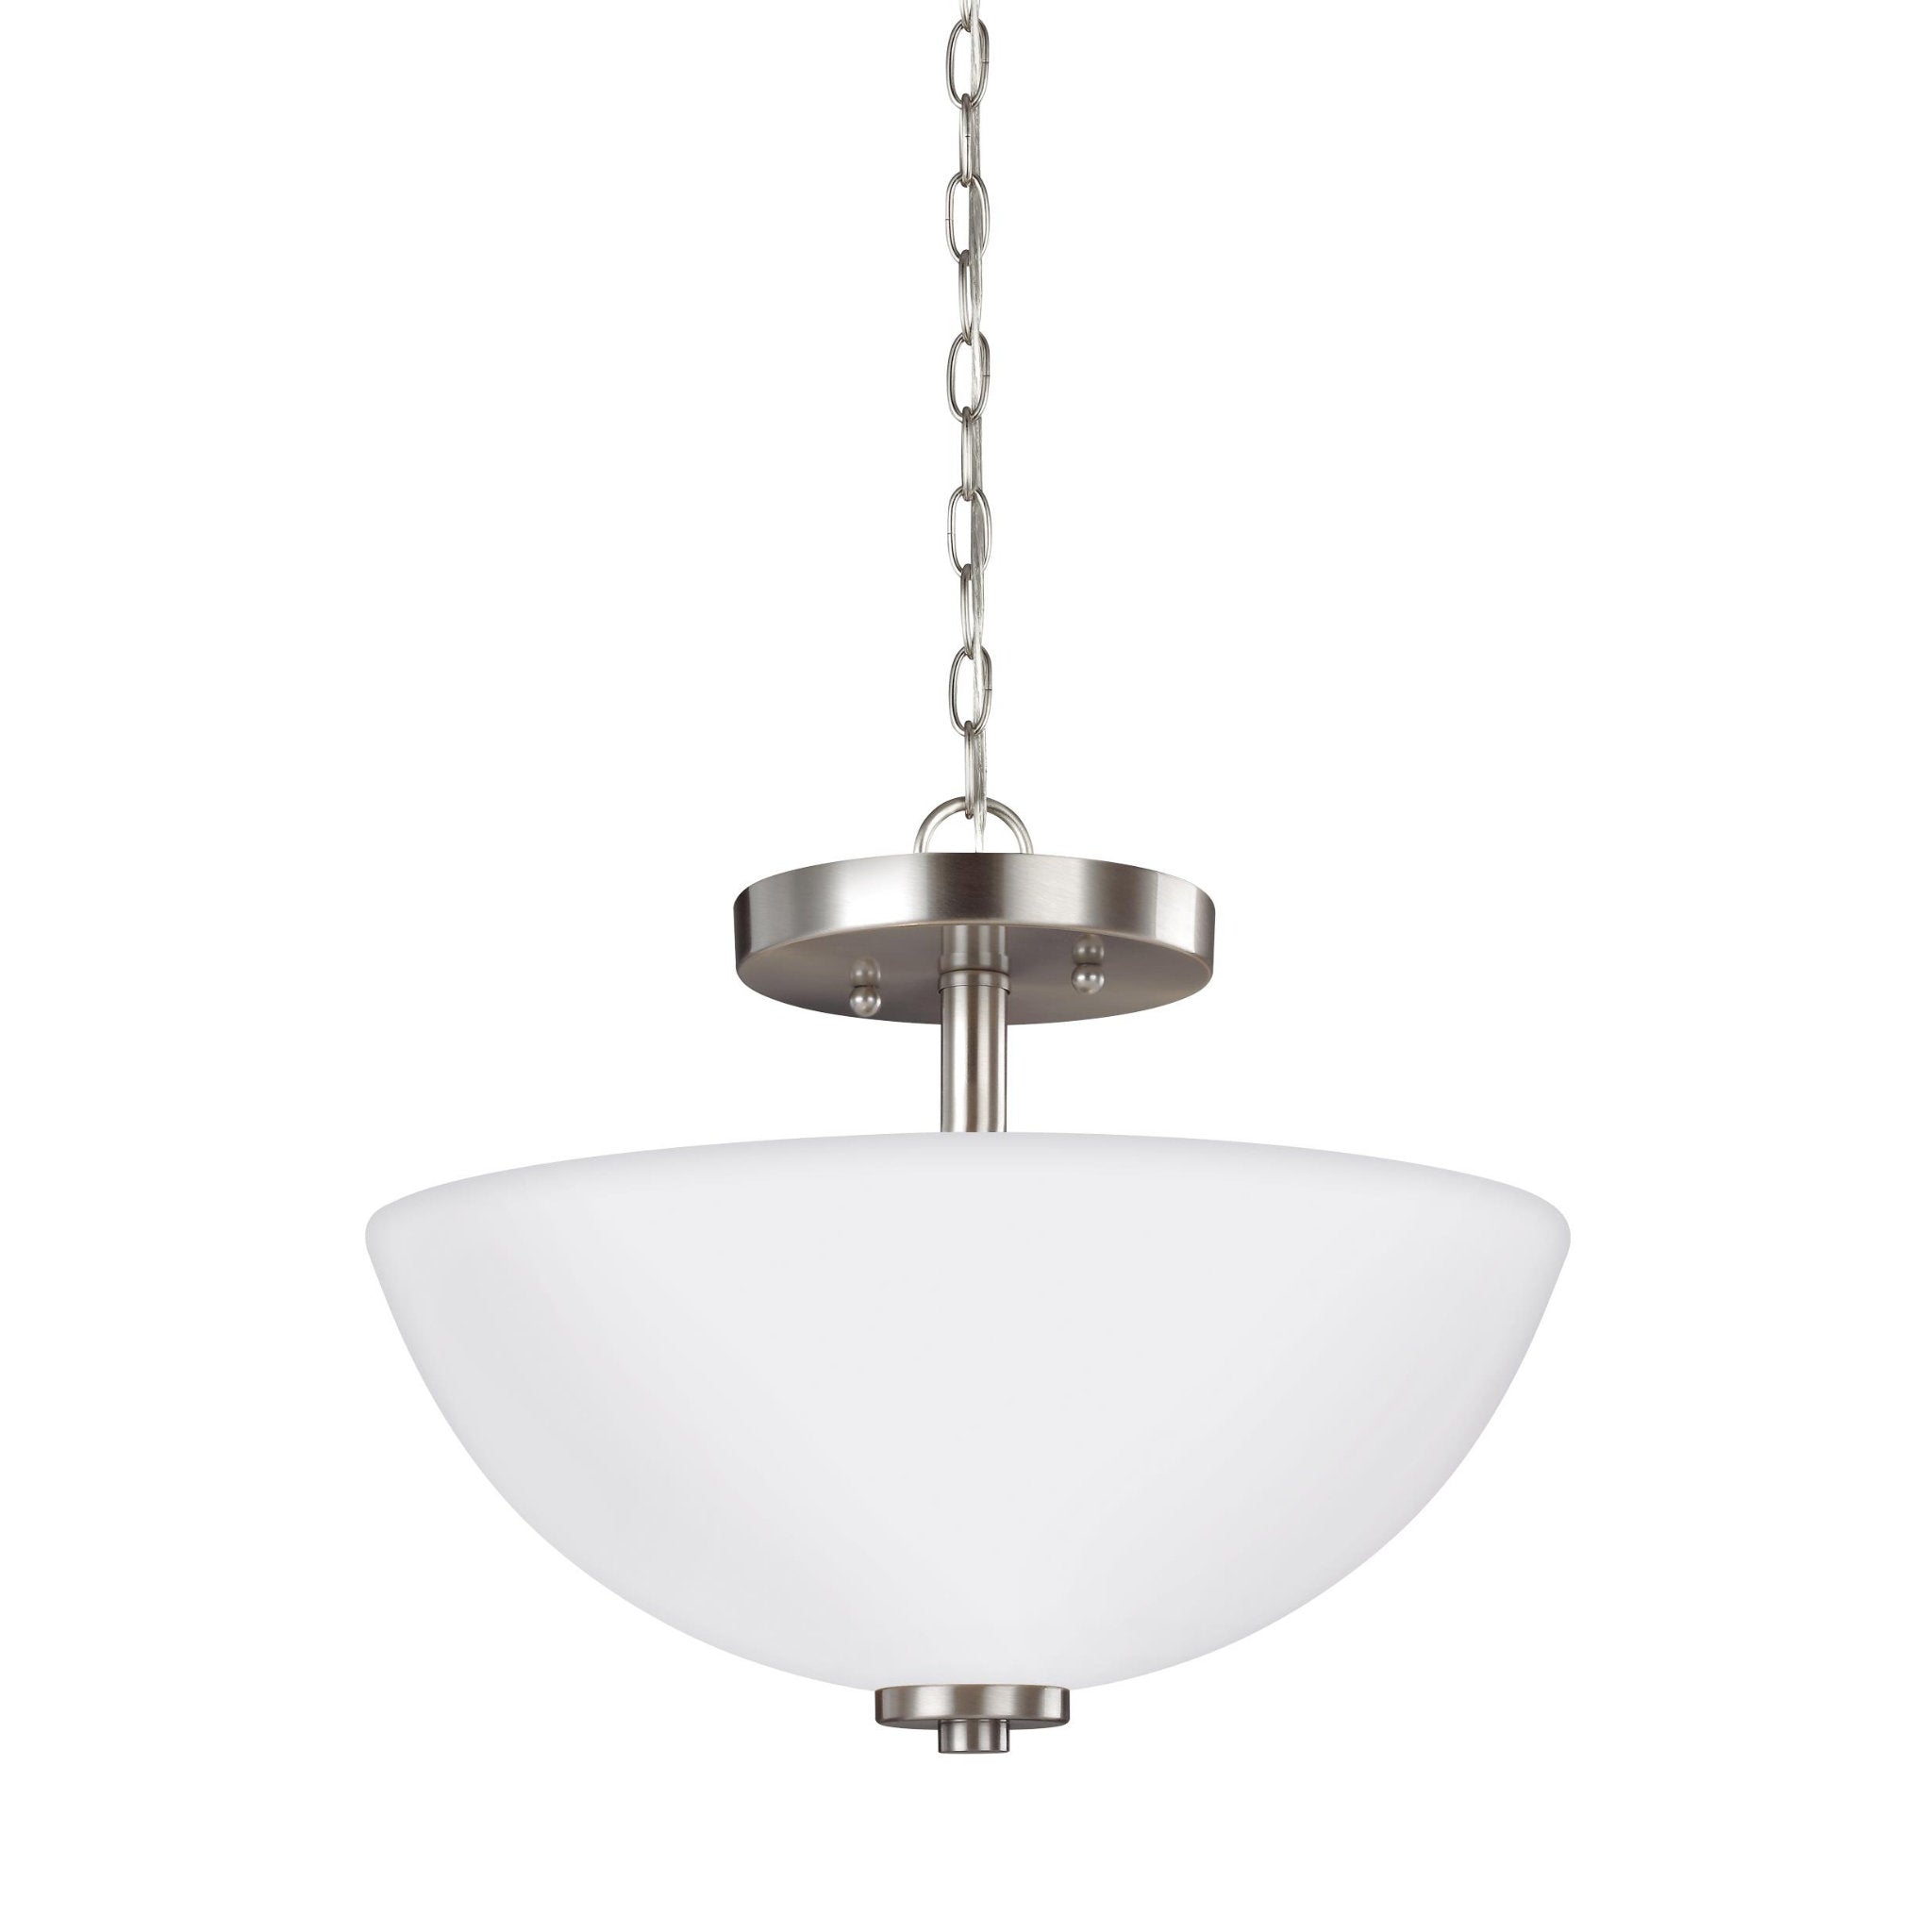 Oslo Two Light Semi-Flush Convertible Pendant Contemporary Ceiling Fixture 13.5" Width 11.25" Height Steel Round Etched / White Inside Shade in Brushed Nickel